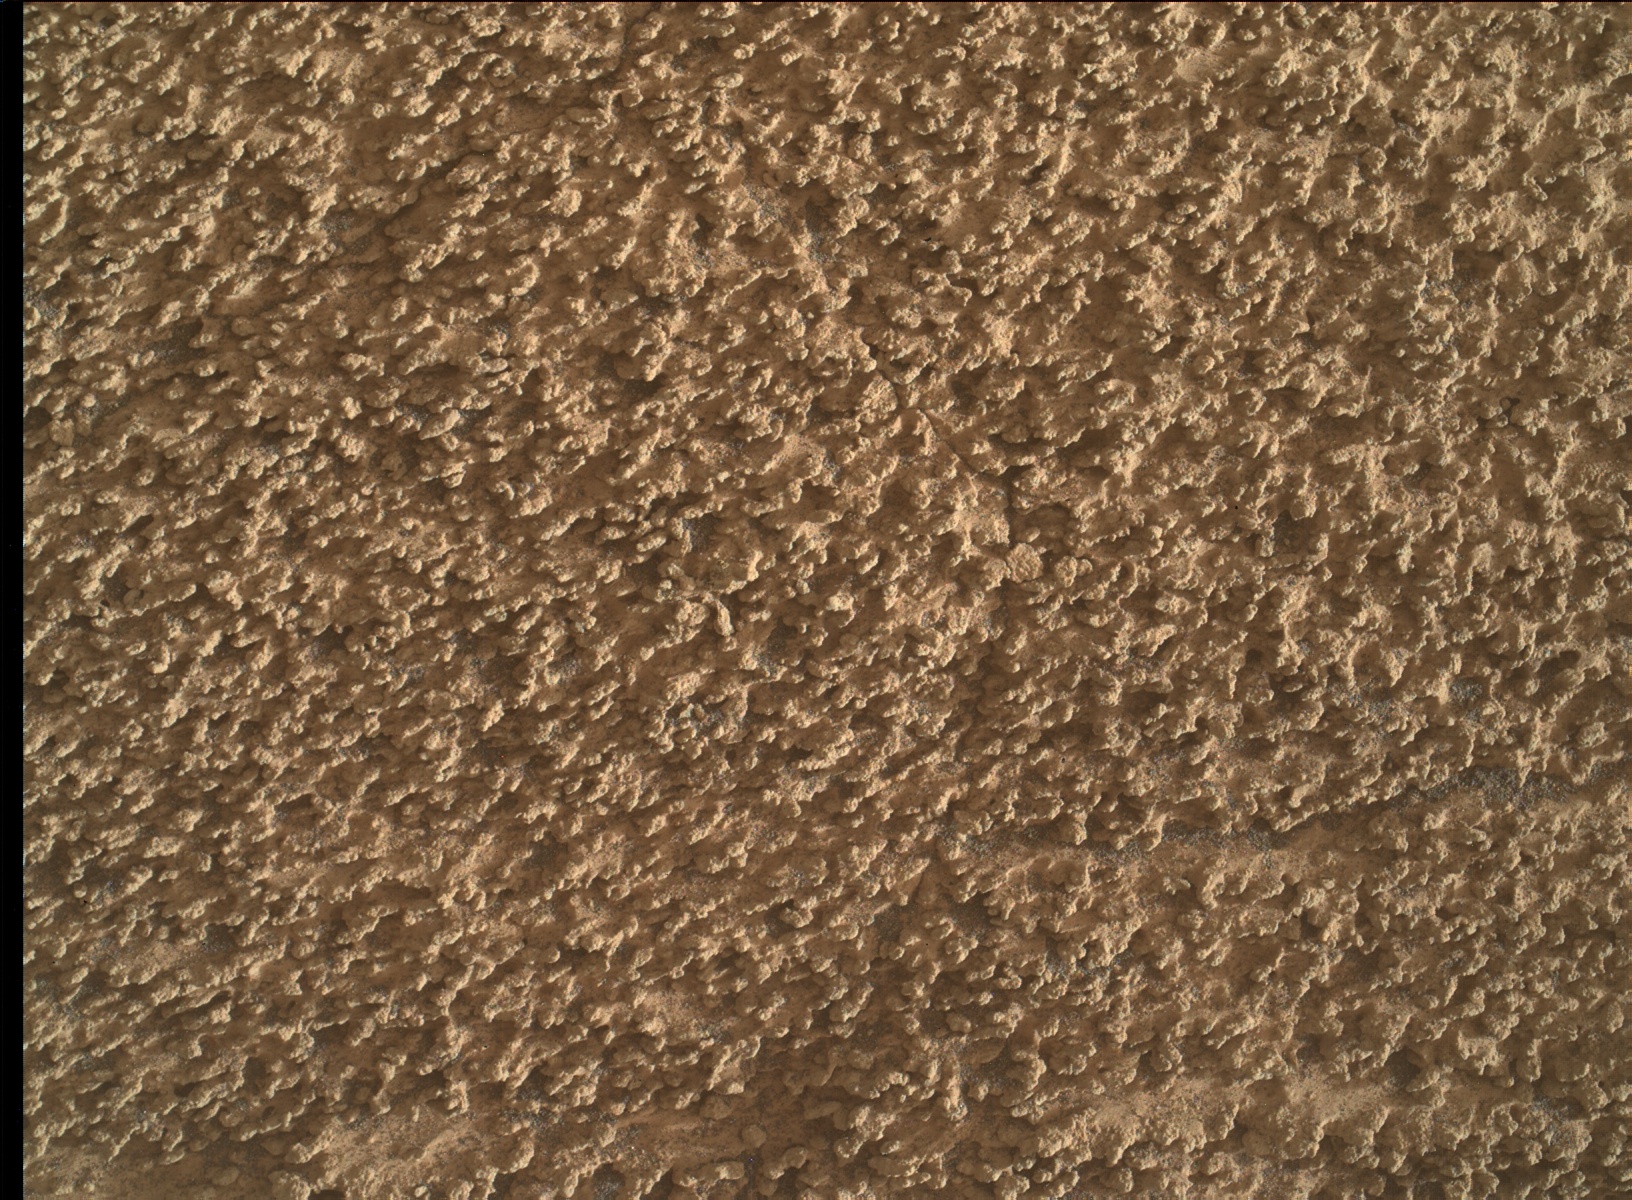 Nasa's Mars rover Curiosity acquired this image using its Mars Hand Lens Imager (MAHLI) on Sol 3583